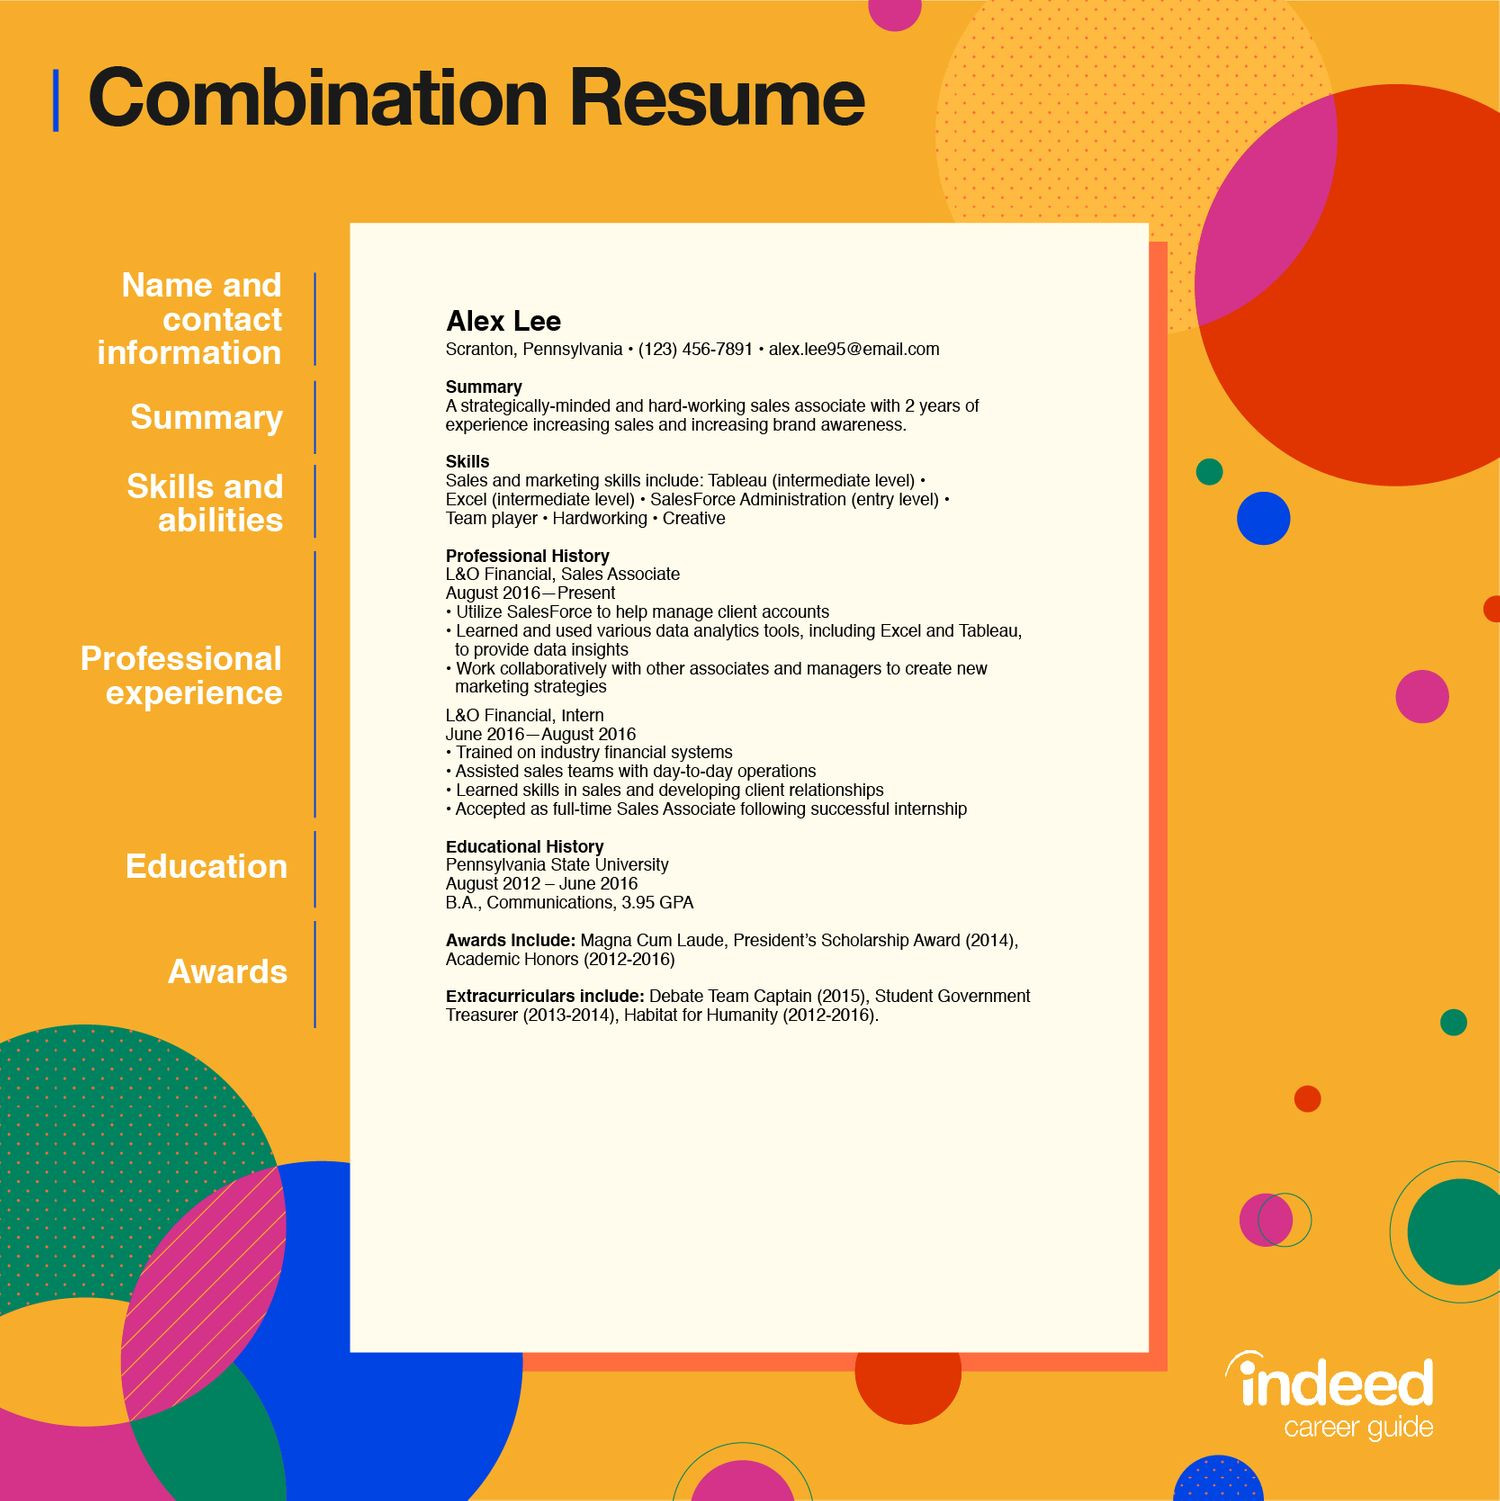 Indeed Sample Resumes On Wifi Testing top Resume formats: Tips and Examples Of 3 Common Resumes Indeed.com